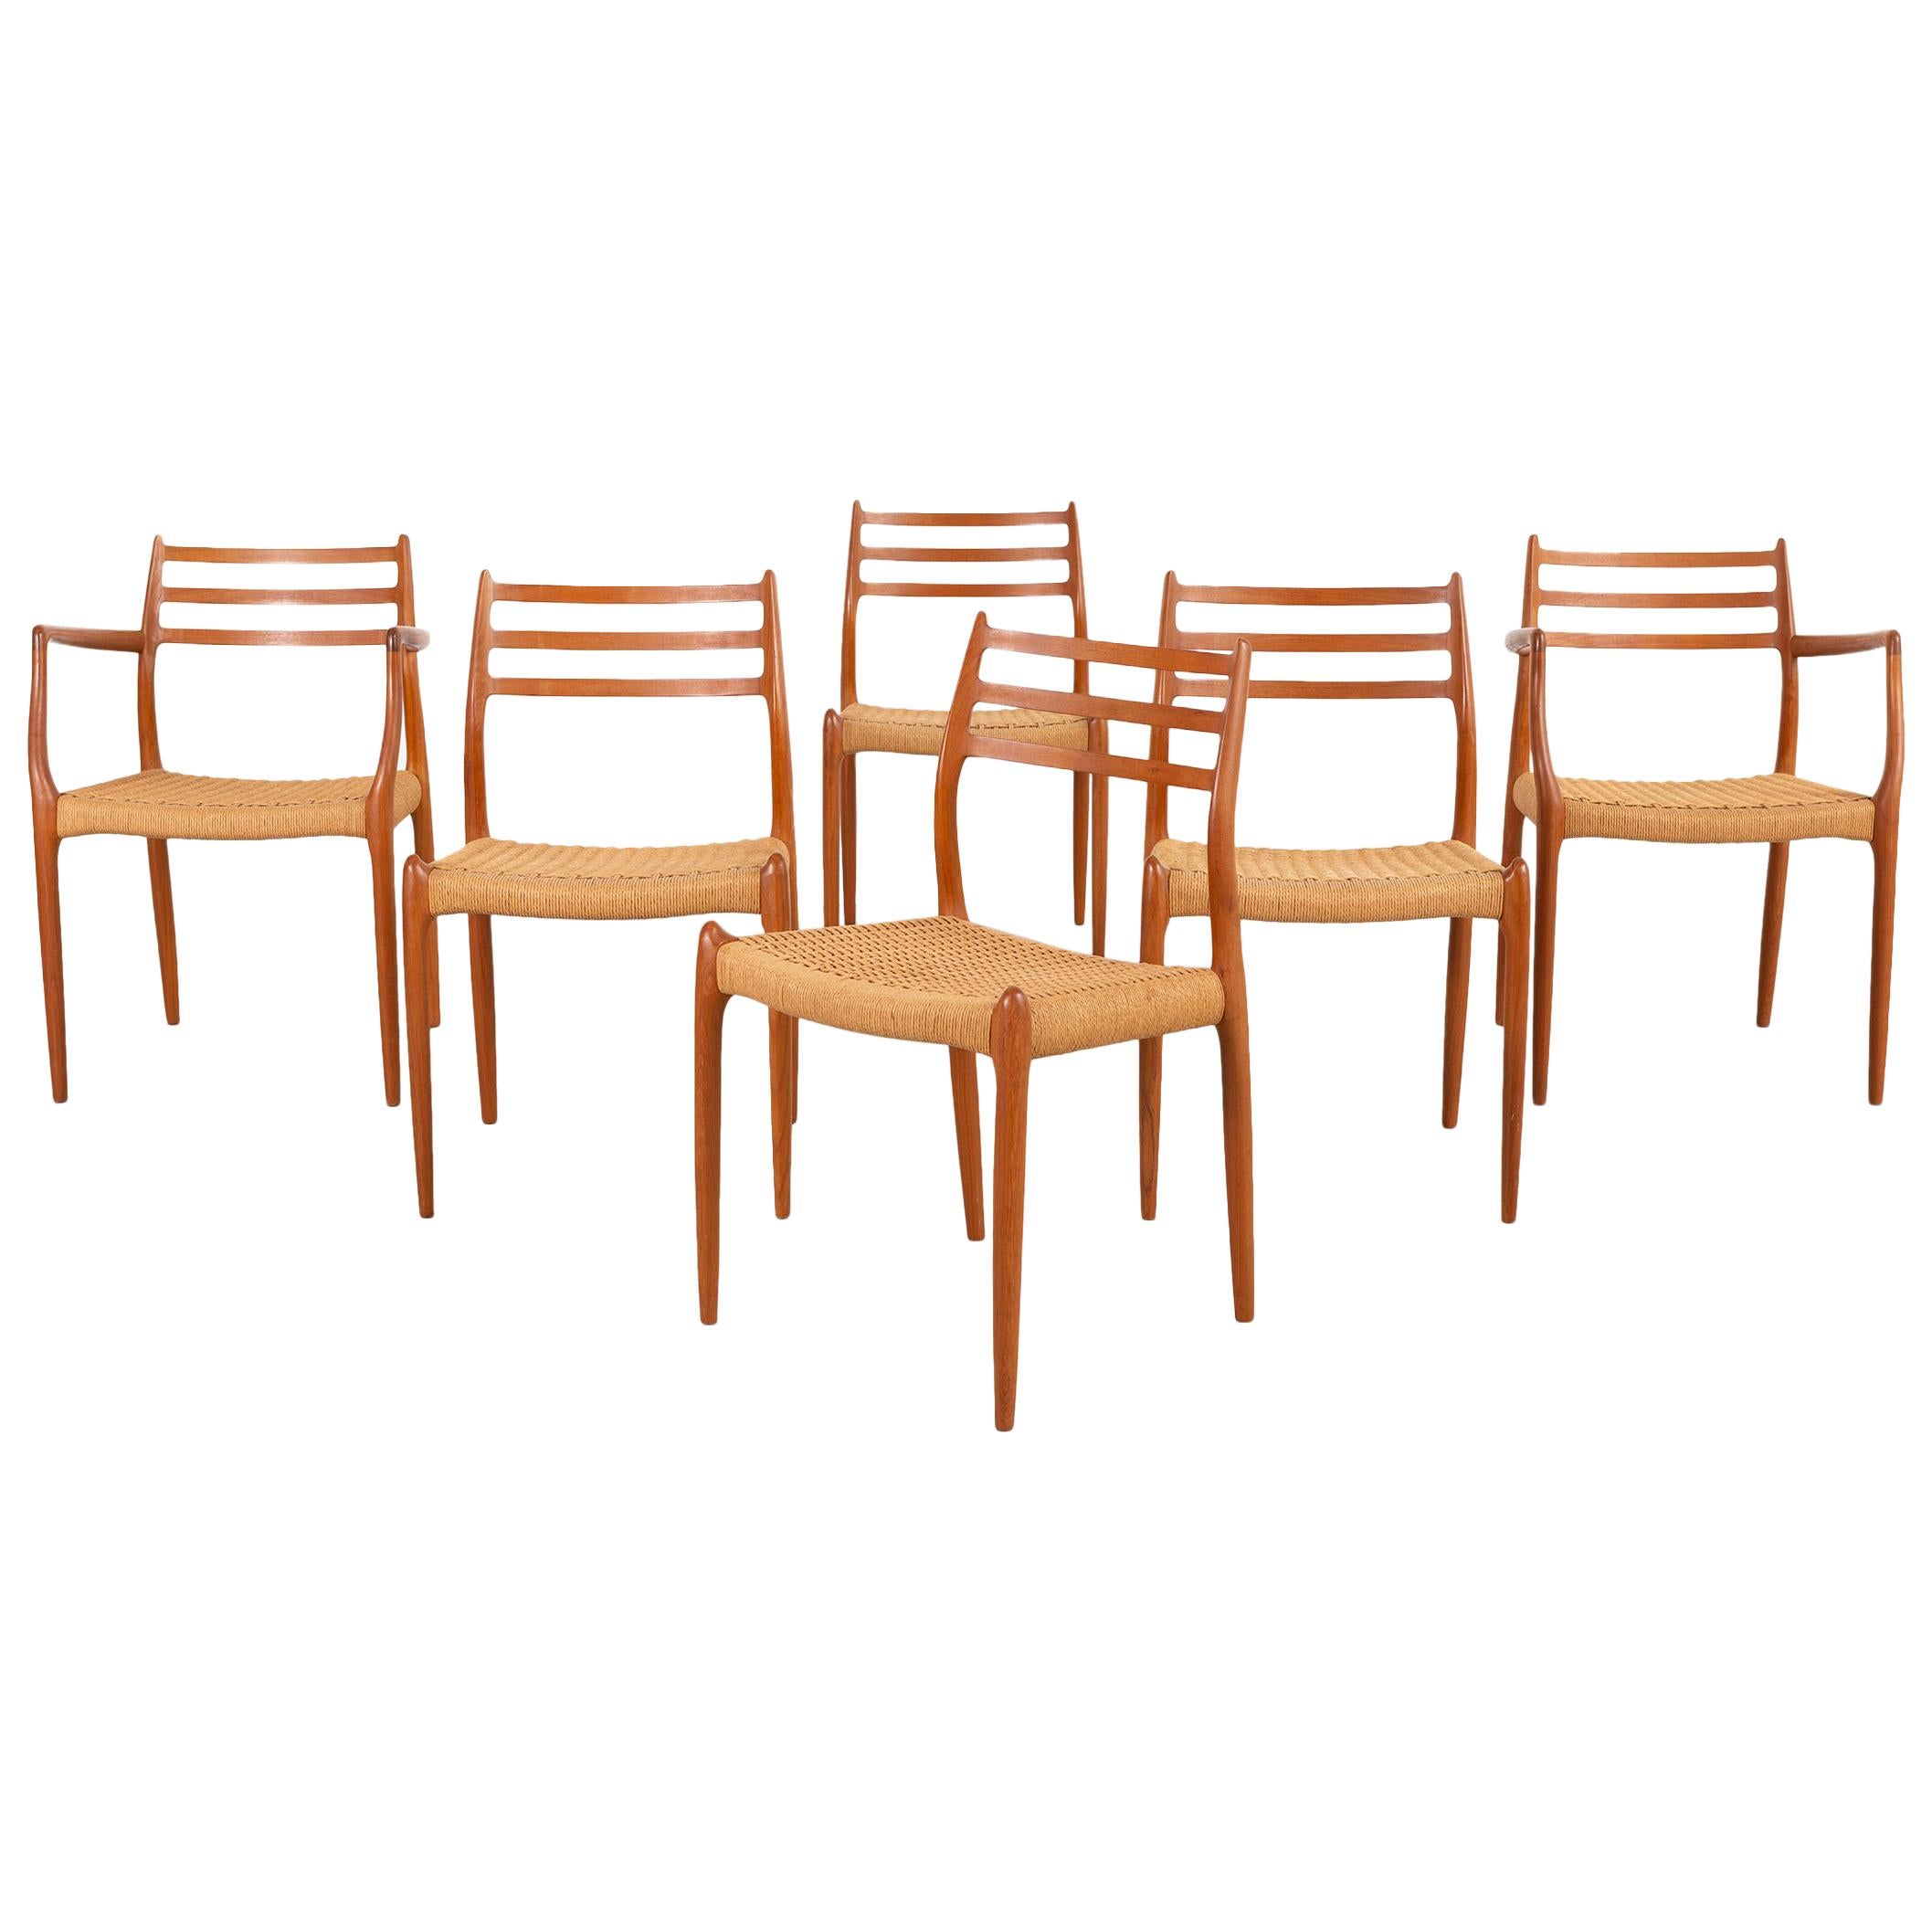 Set of Niels Moller Mid-Century Modern Dining Chairs